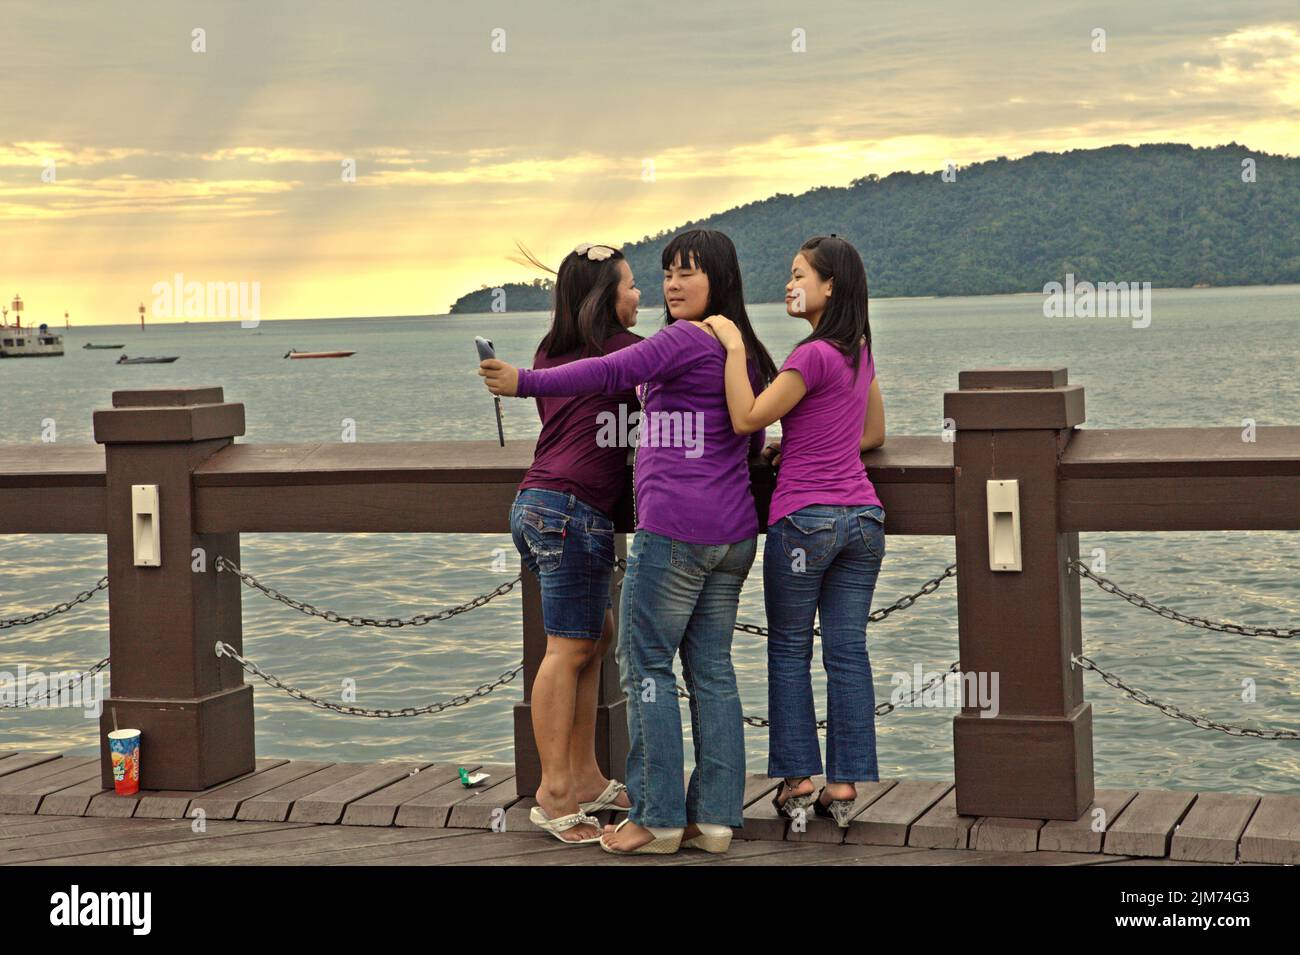 Young women taking selfie photo in a background of seascape view as they are having a leisure time on a seaside viewing platform in Kota Kinabalu, Sabah, Malaysia. Stock Photo